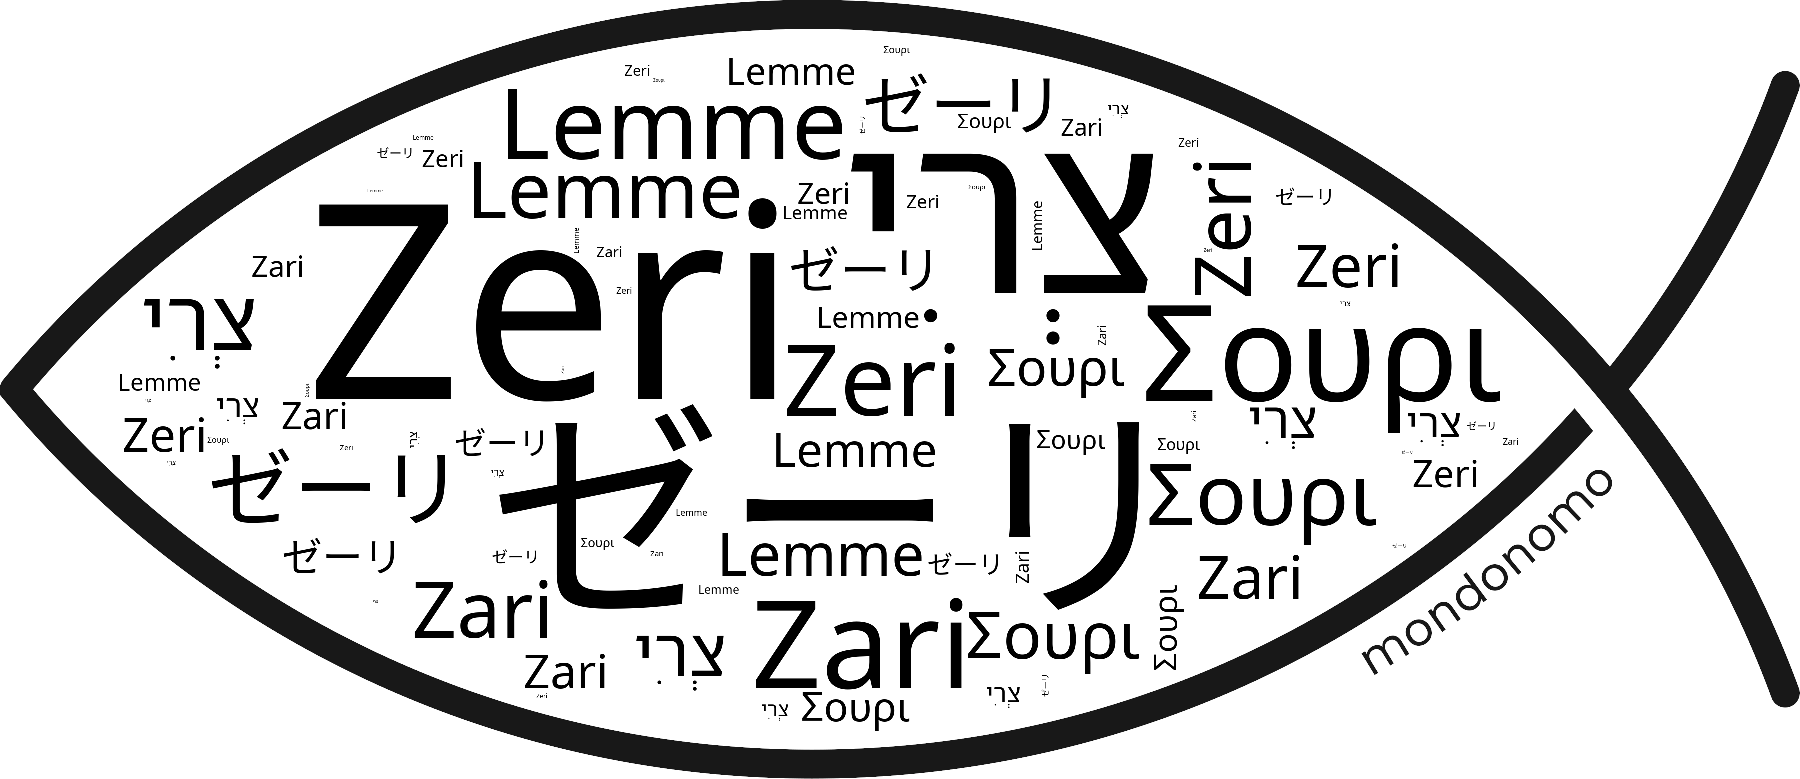 Name Zeri in the world's Bibles